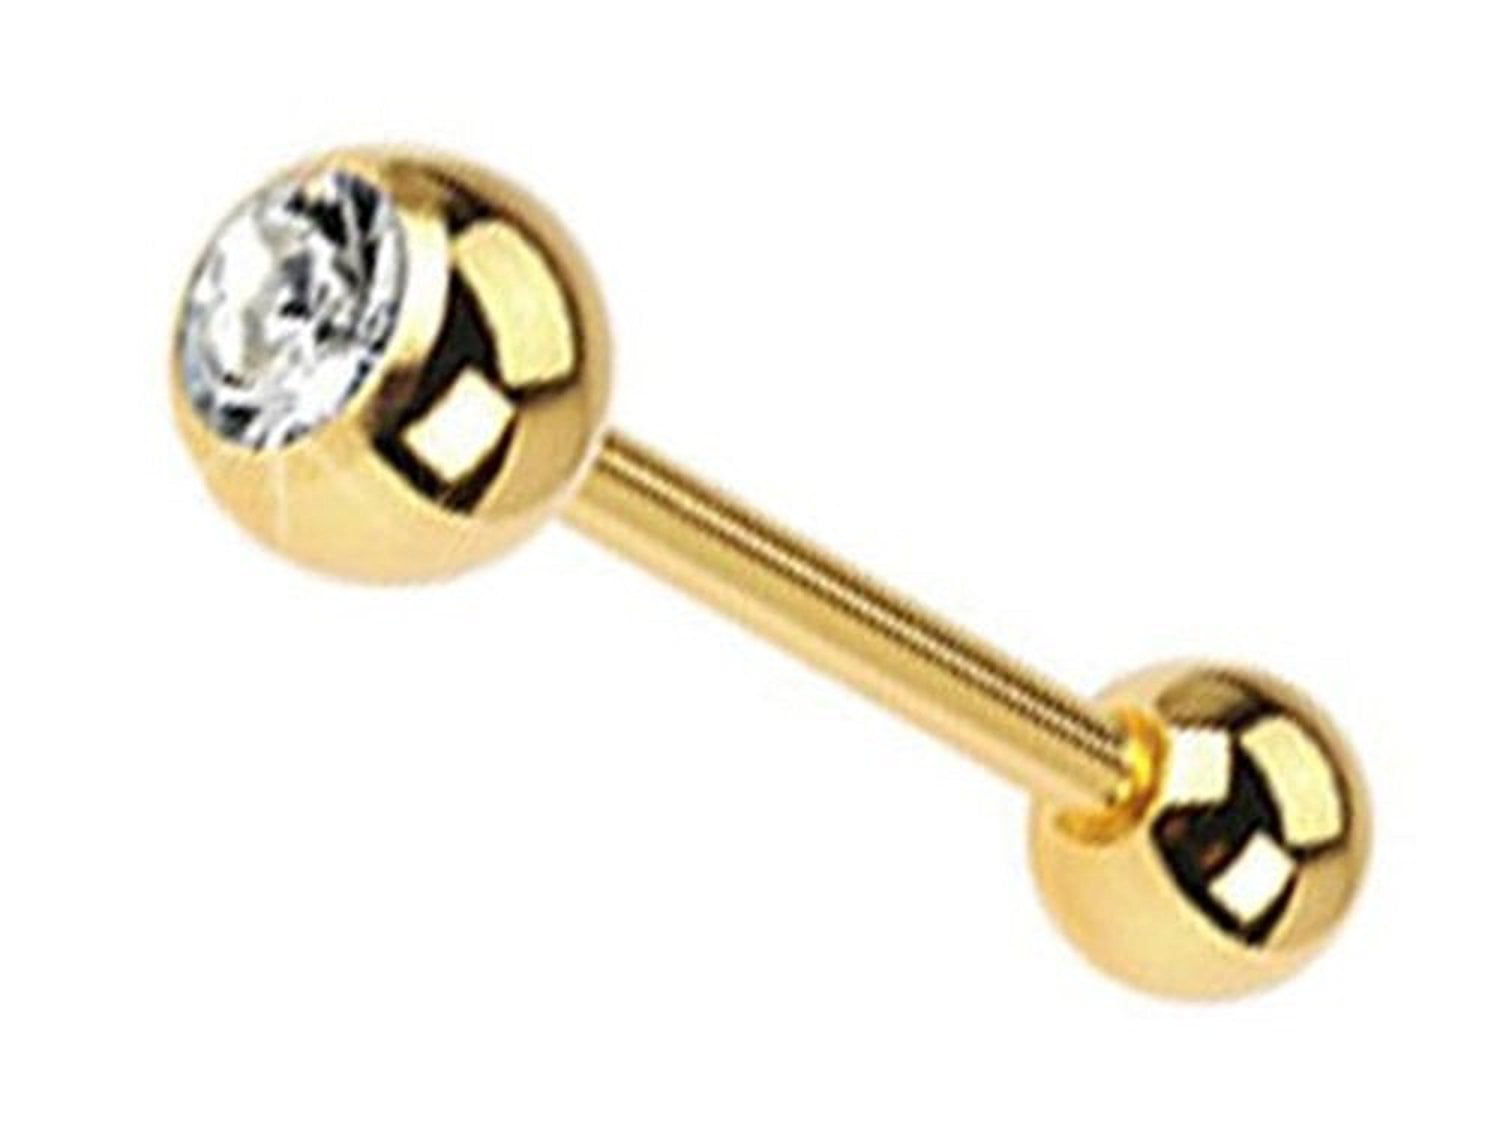 X14 14k Gold Plated Tongue Ring 14G Clear C.Z. Gem 5/8"(16mm) Length